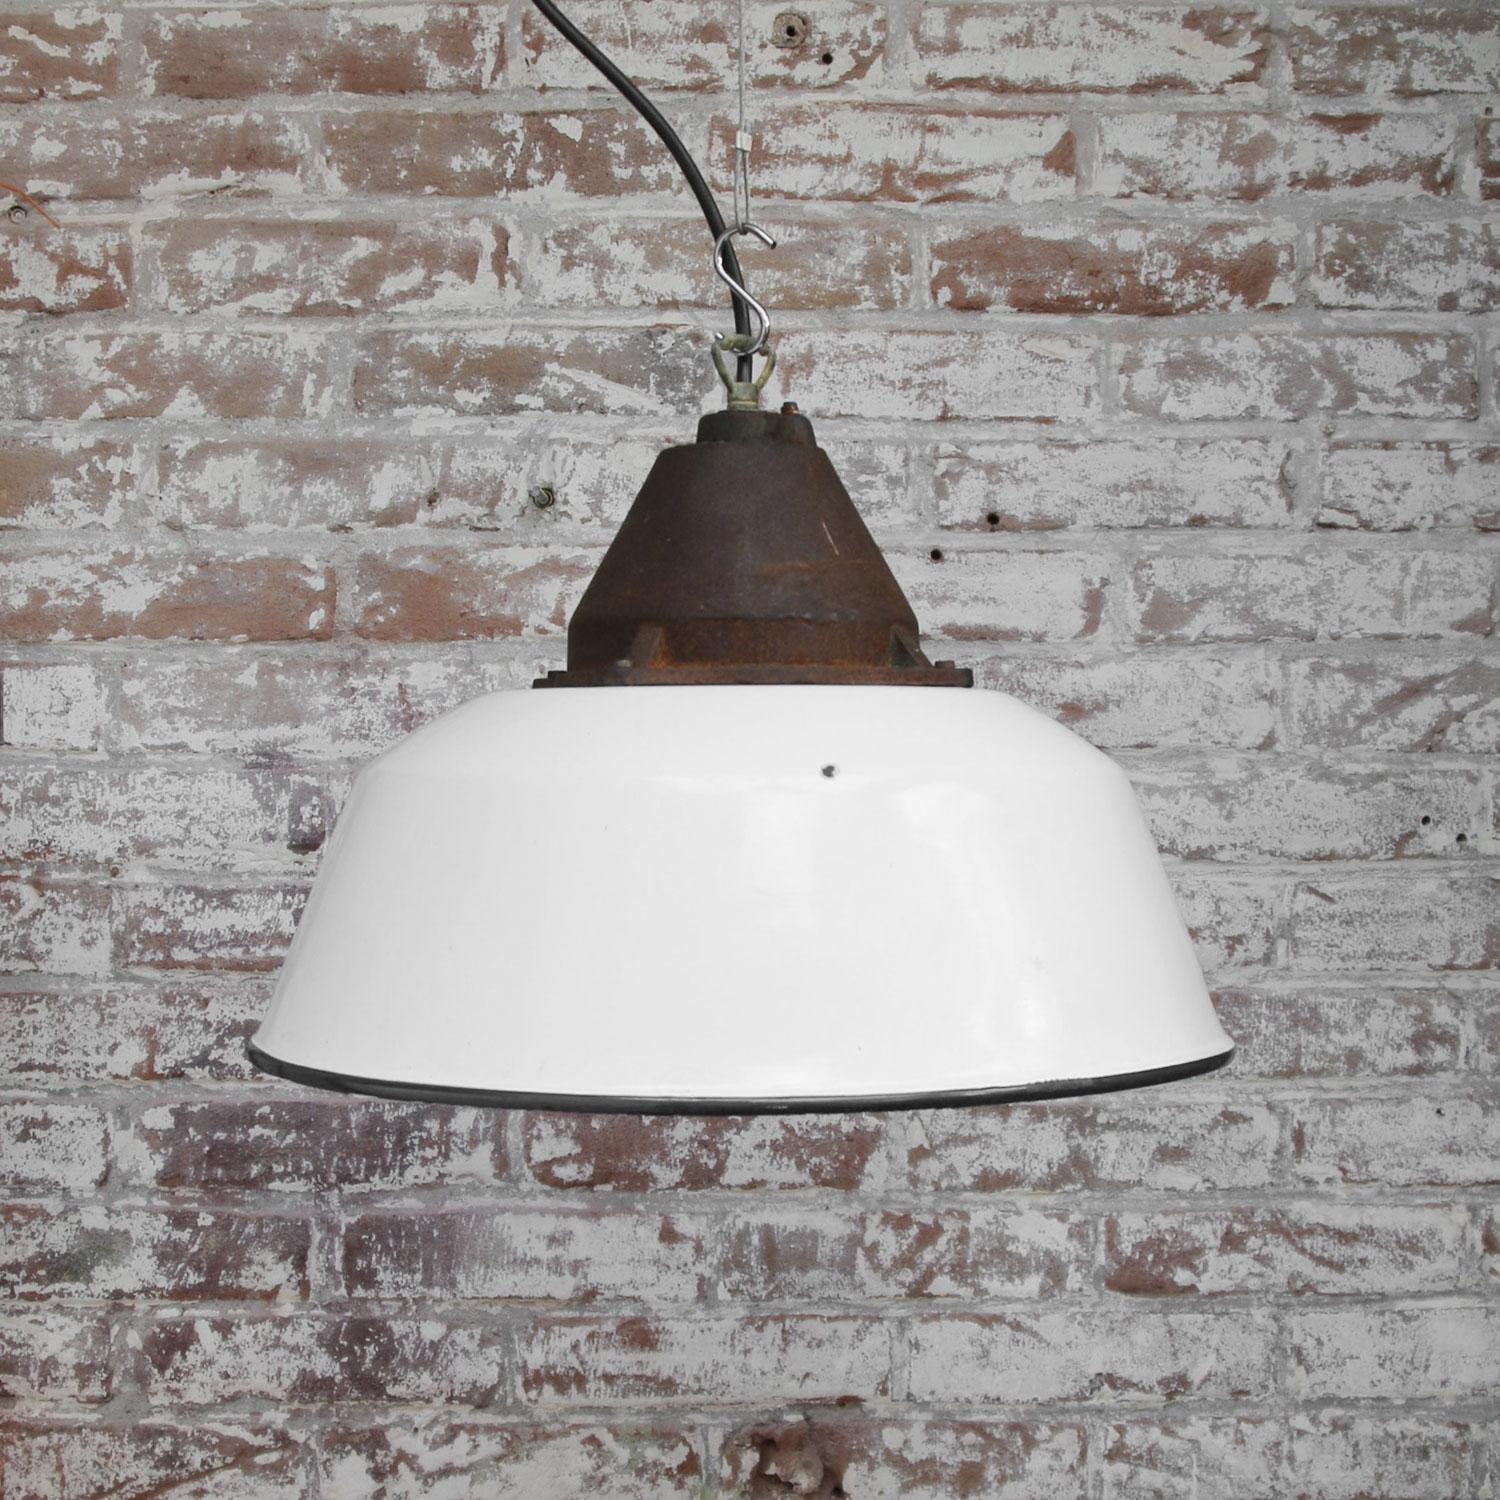 White Enamel Vintage Industrial Cast Iron Factory Pendant Lights In Good Condition For Sale In Amsterdam, NL